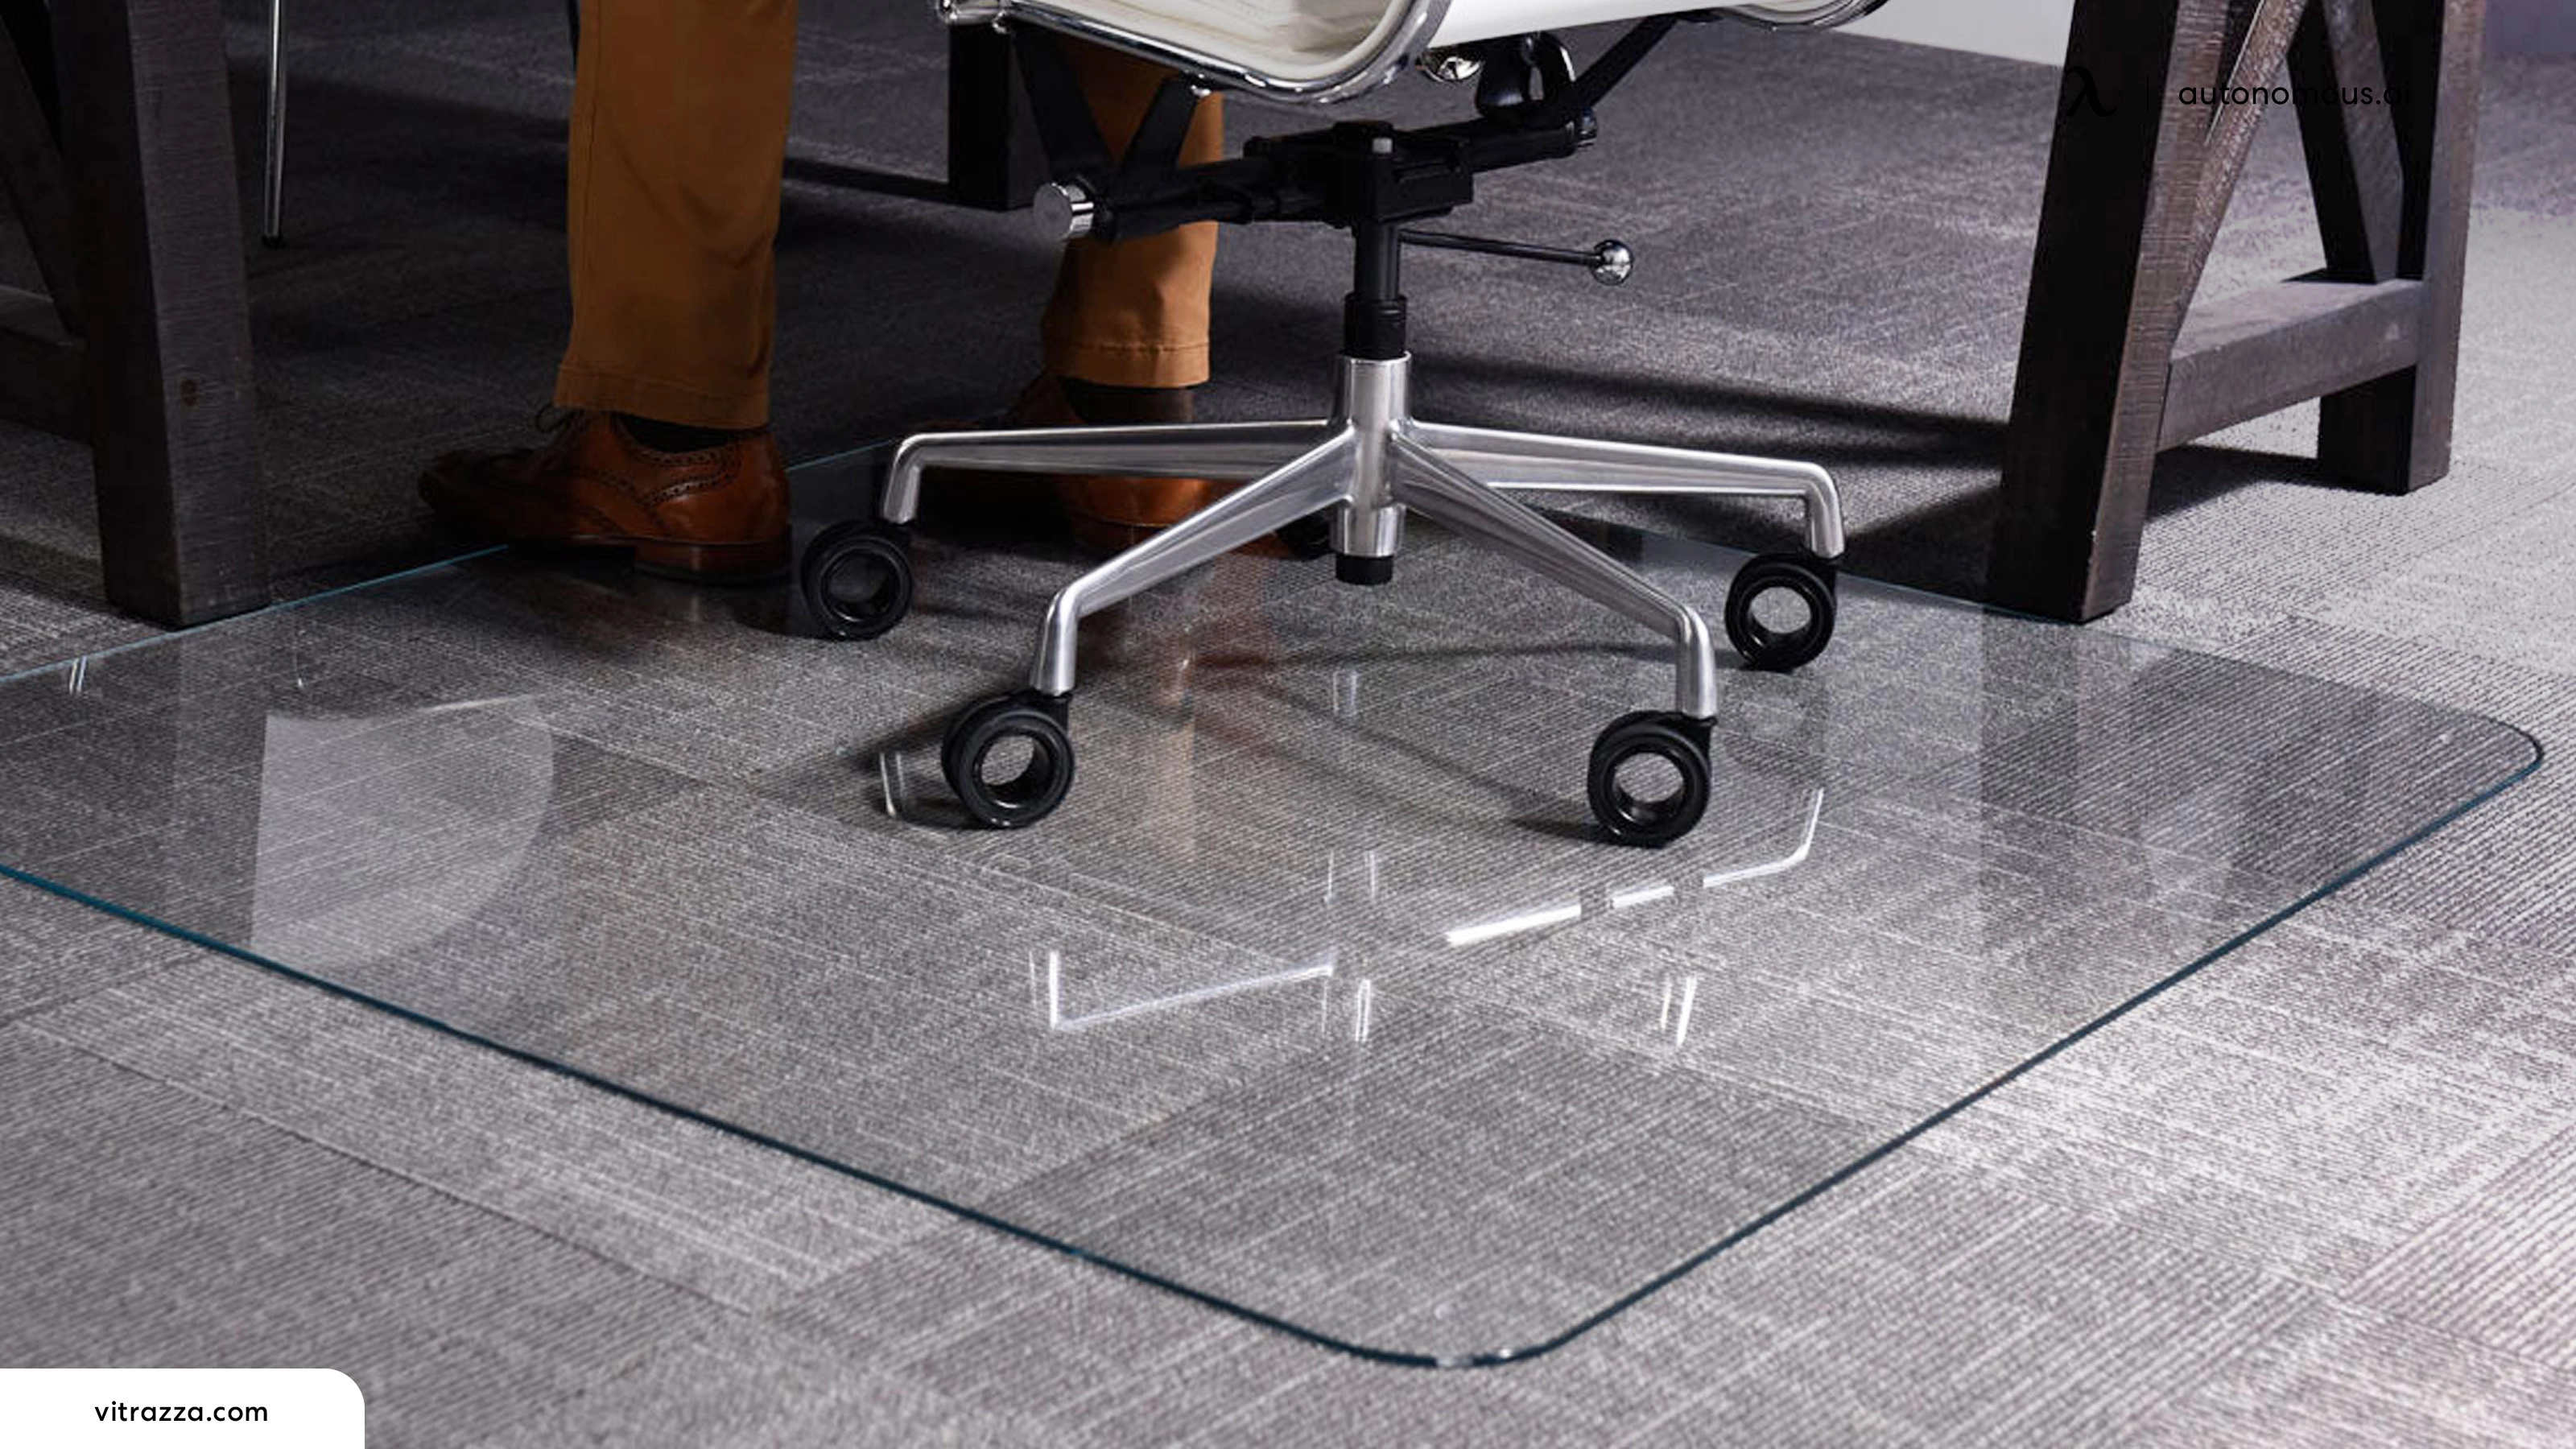 Office Chair Mats for Carpet: Top List & Buying Guide